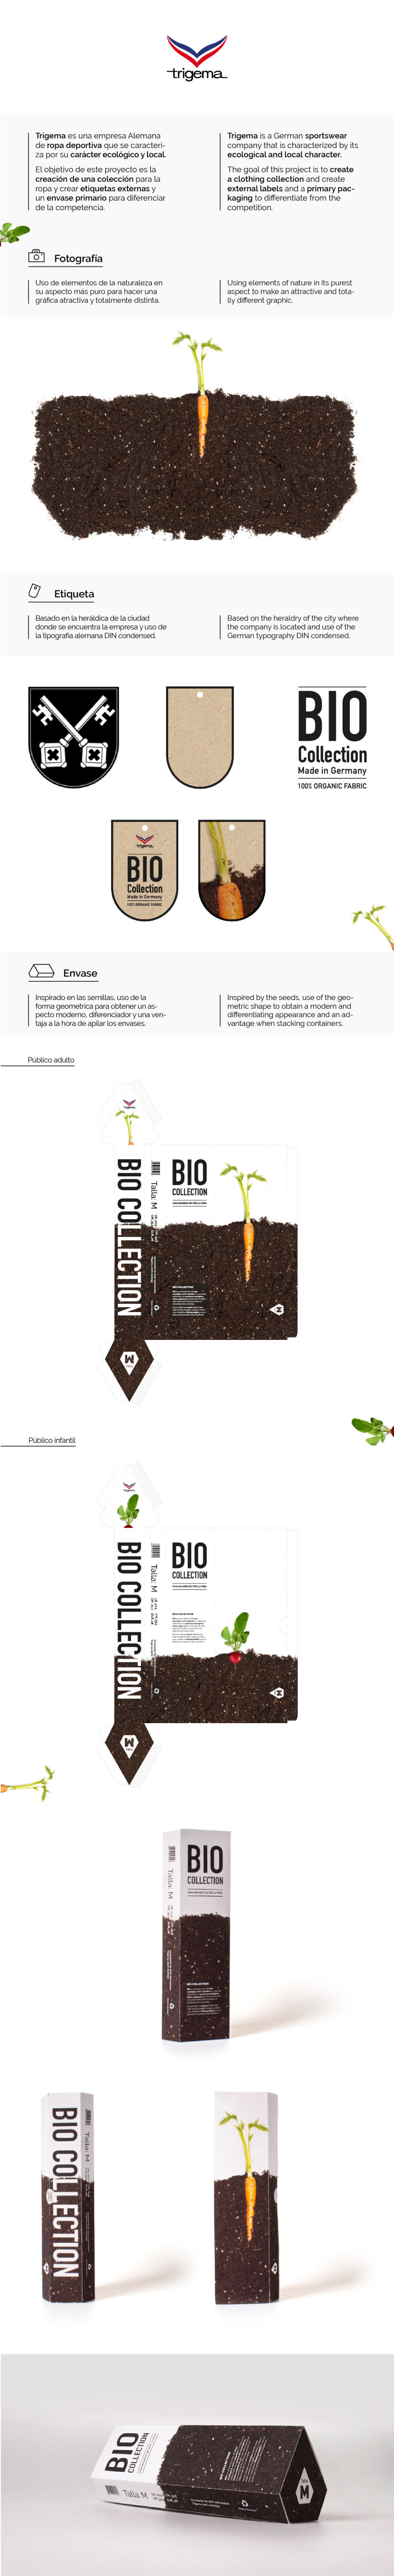 BIO COLLECTION -Packaging -1